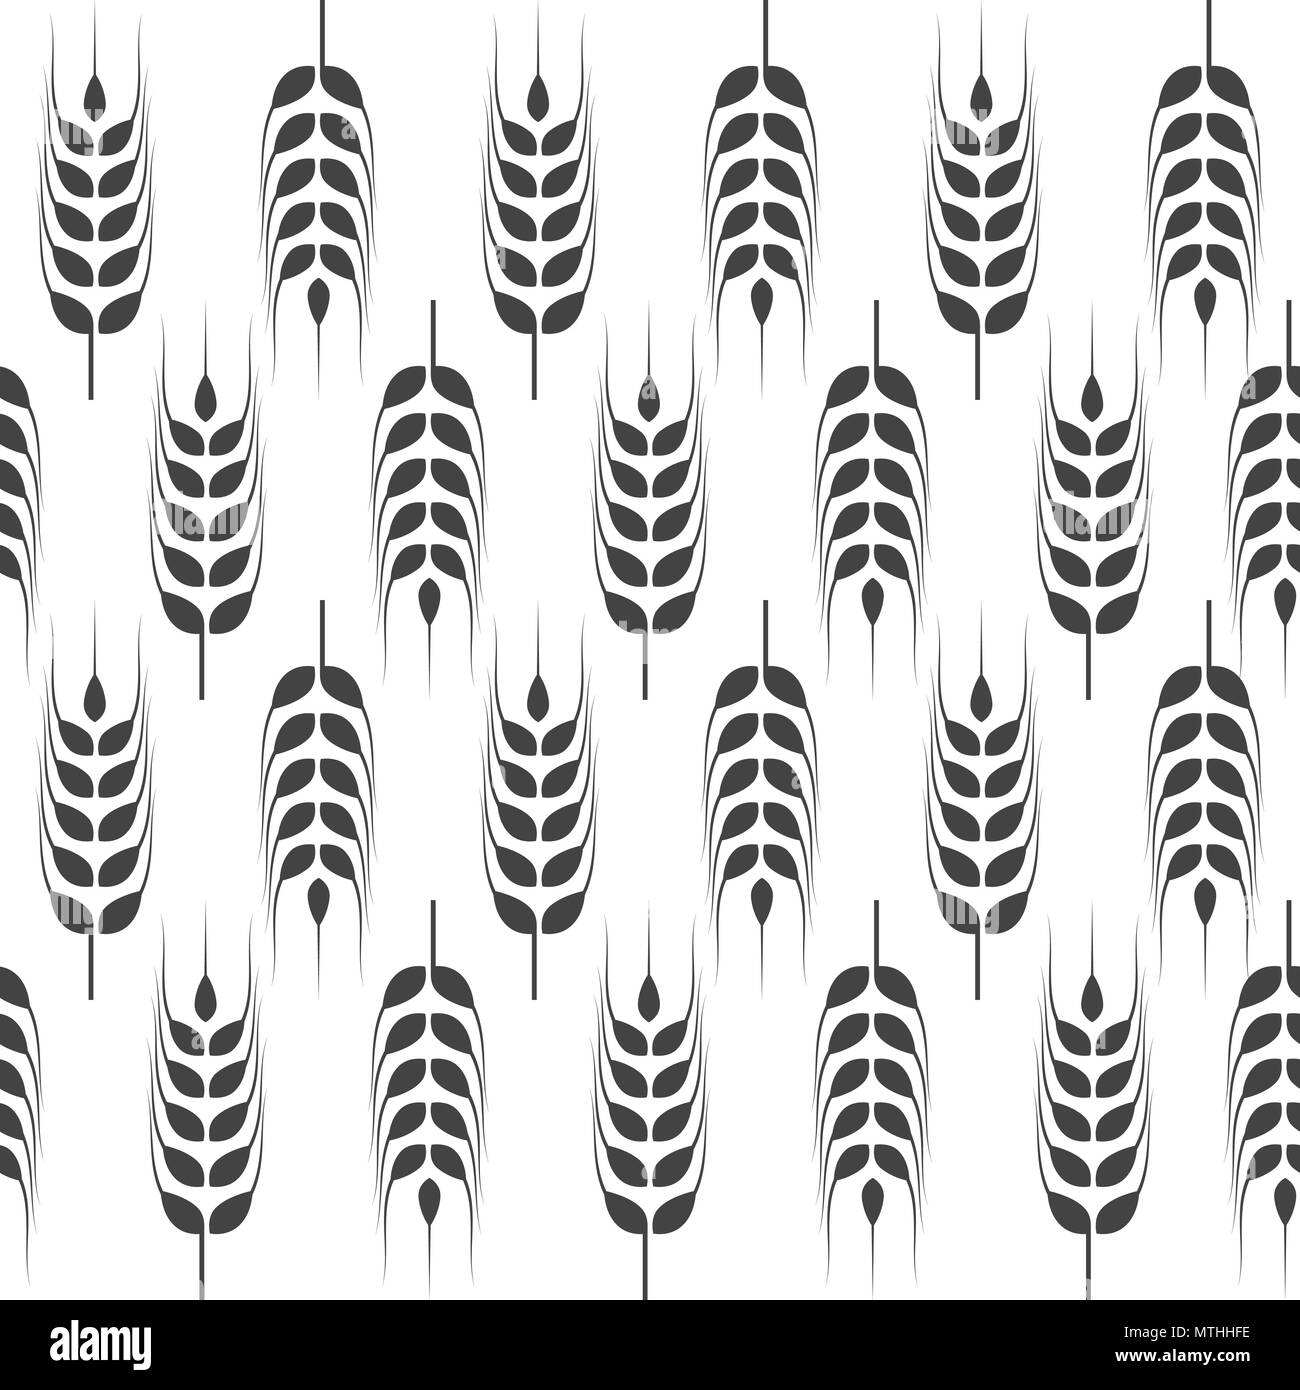 Agriculture wheat Background vector icon Illustration design Stock Vector